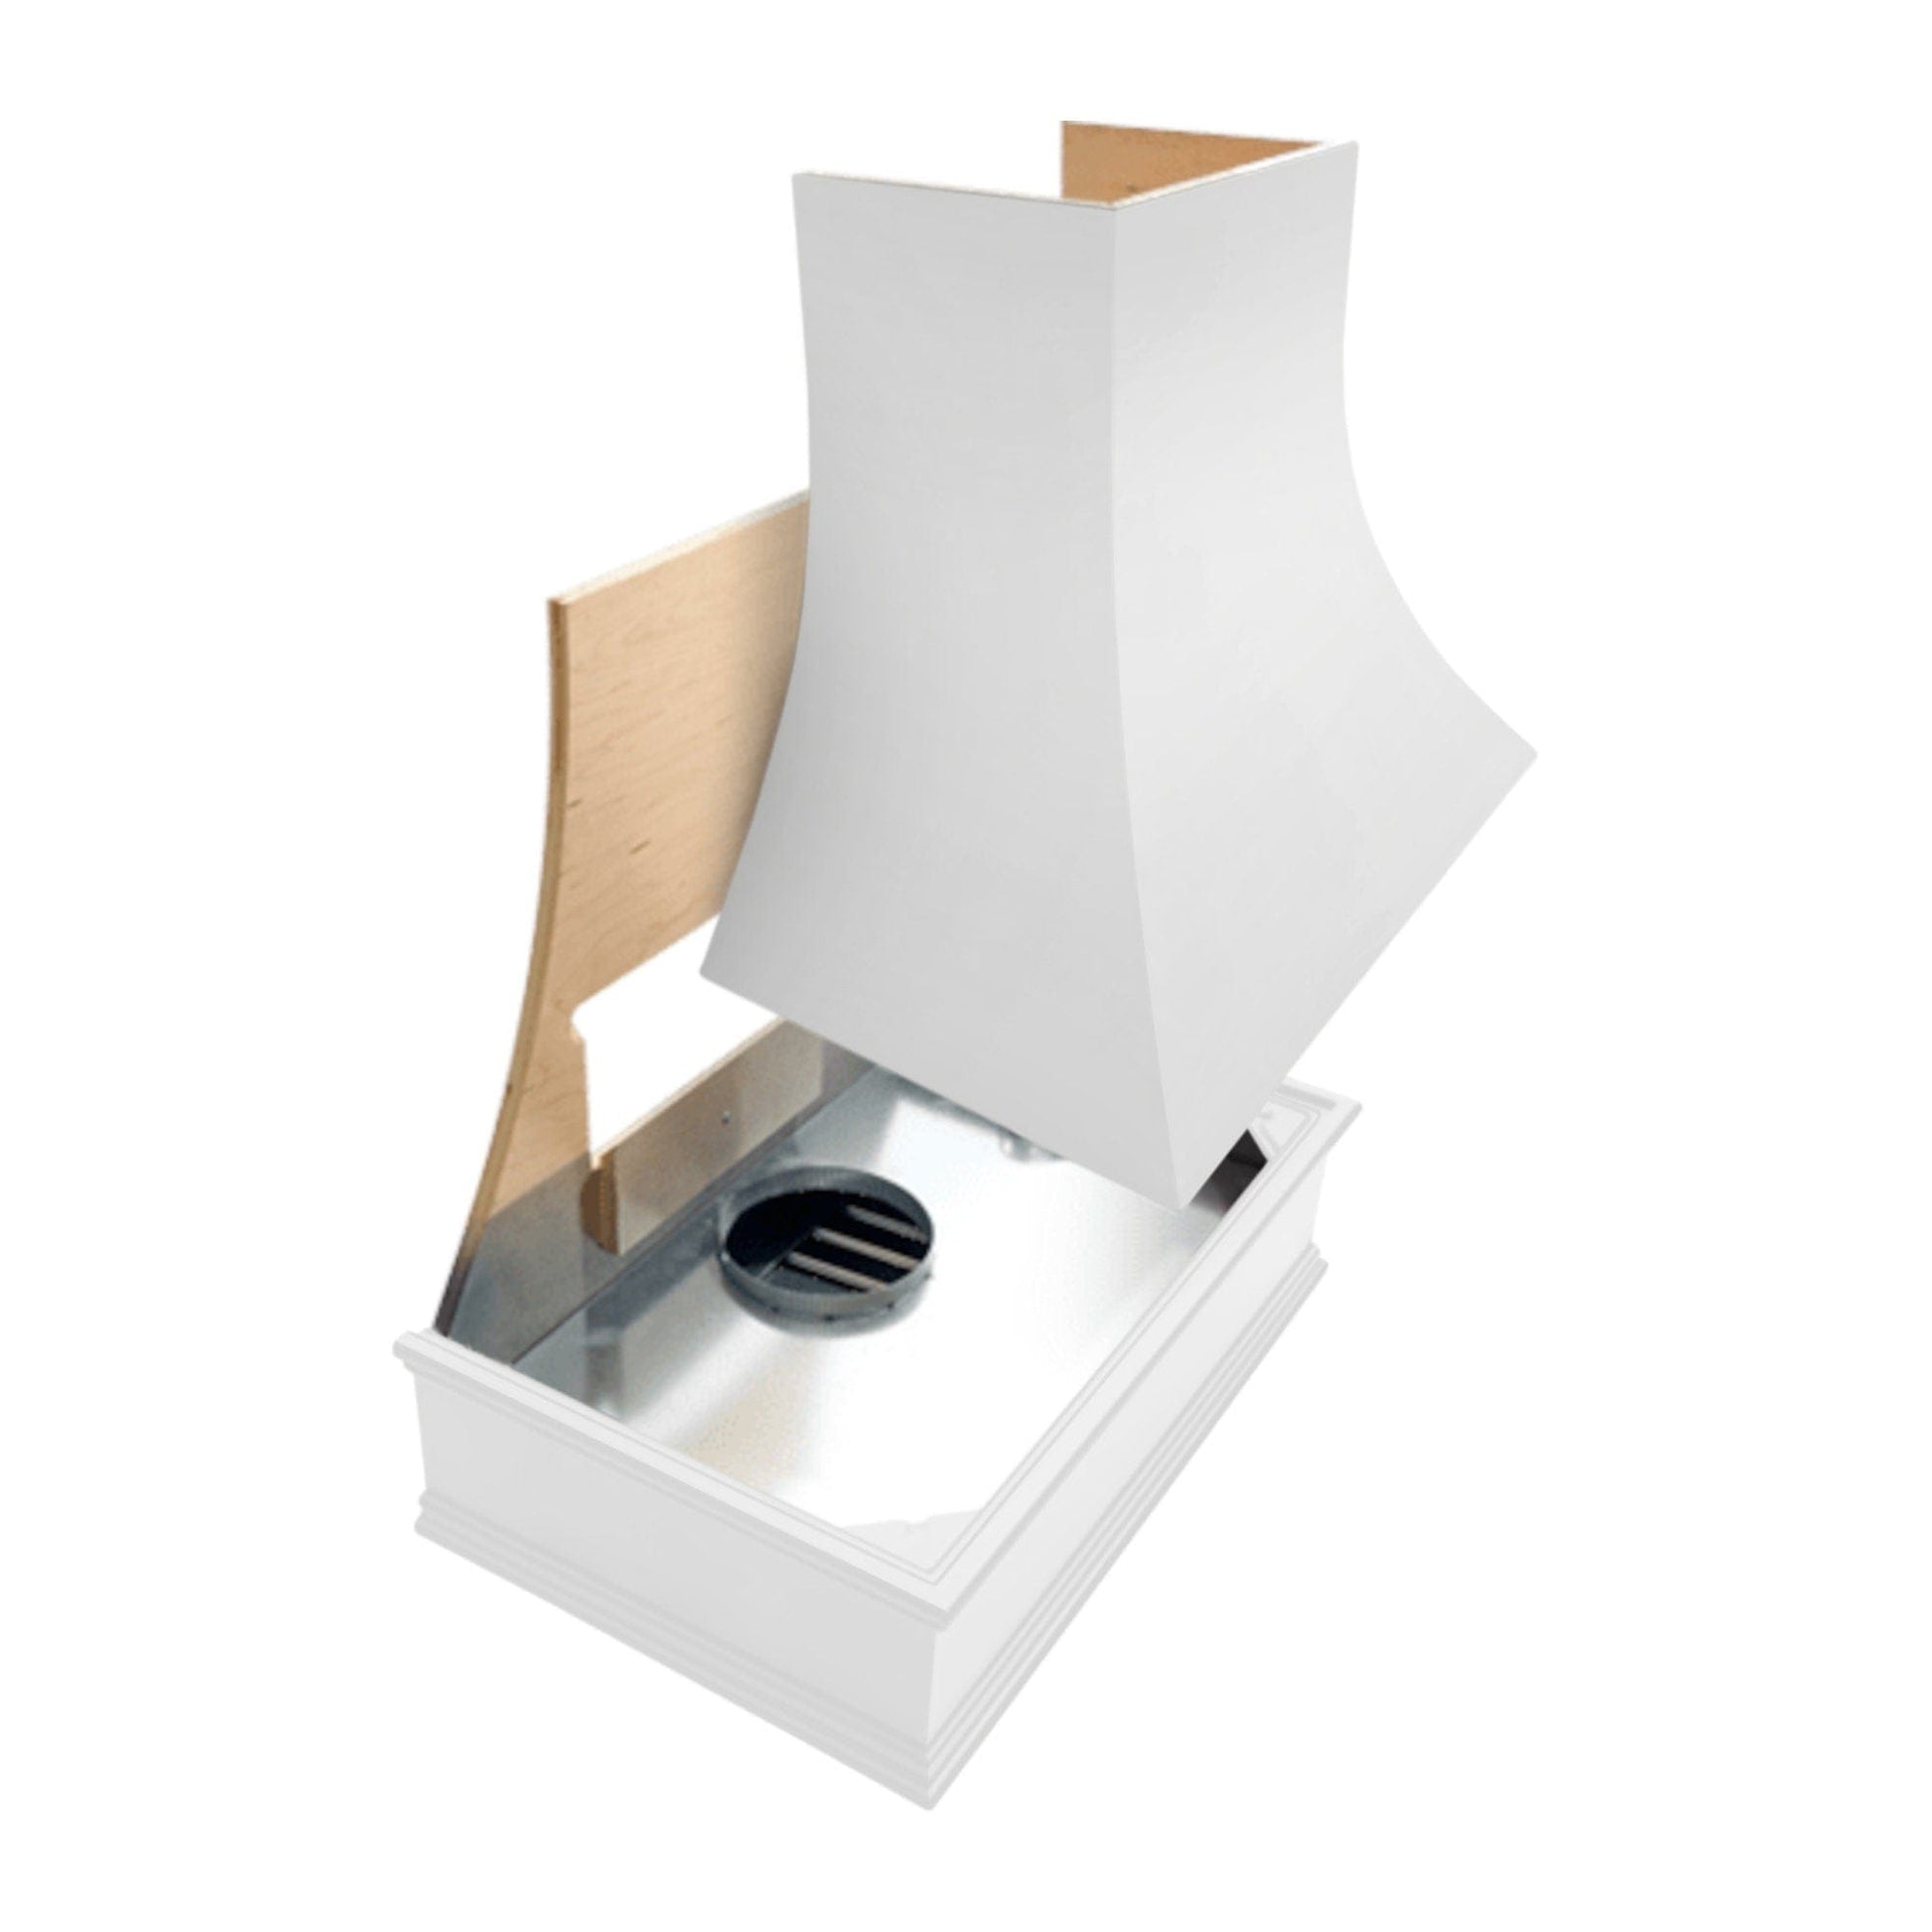 Riley & Higgs White Wood Range Hood With Angled Front and Walnut Band - 30", 36", 42", 48", 54" and 60" Widths Available